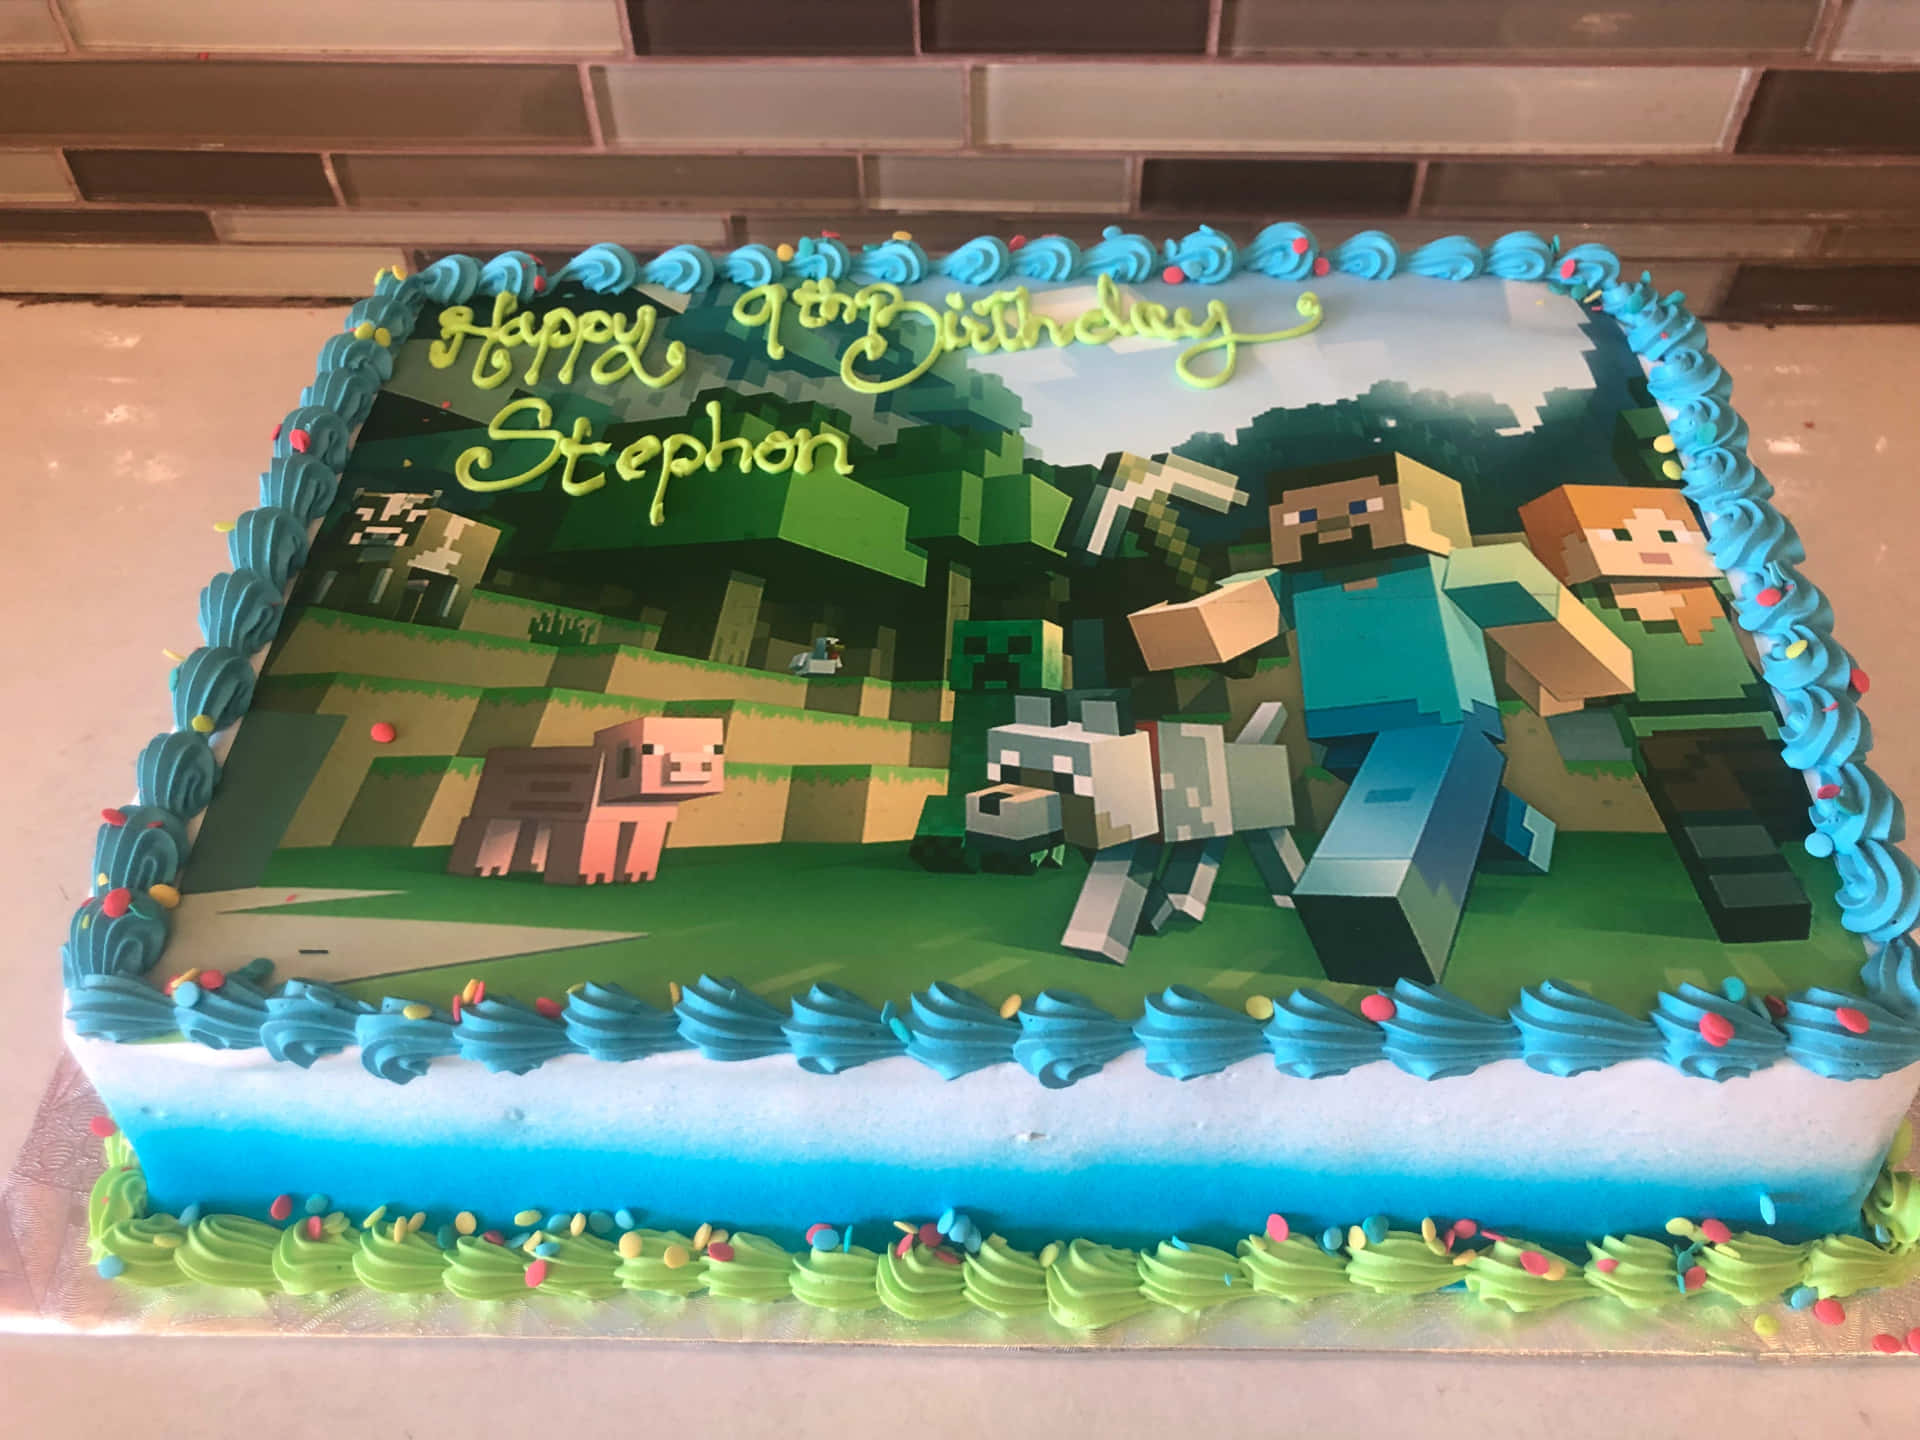 Celebrating a special occasion with a delicious Minecraft-themed cake.